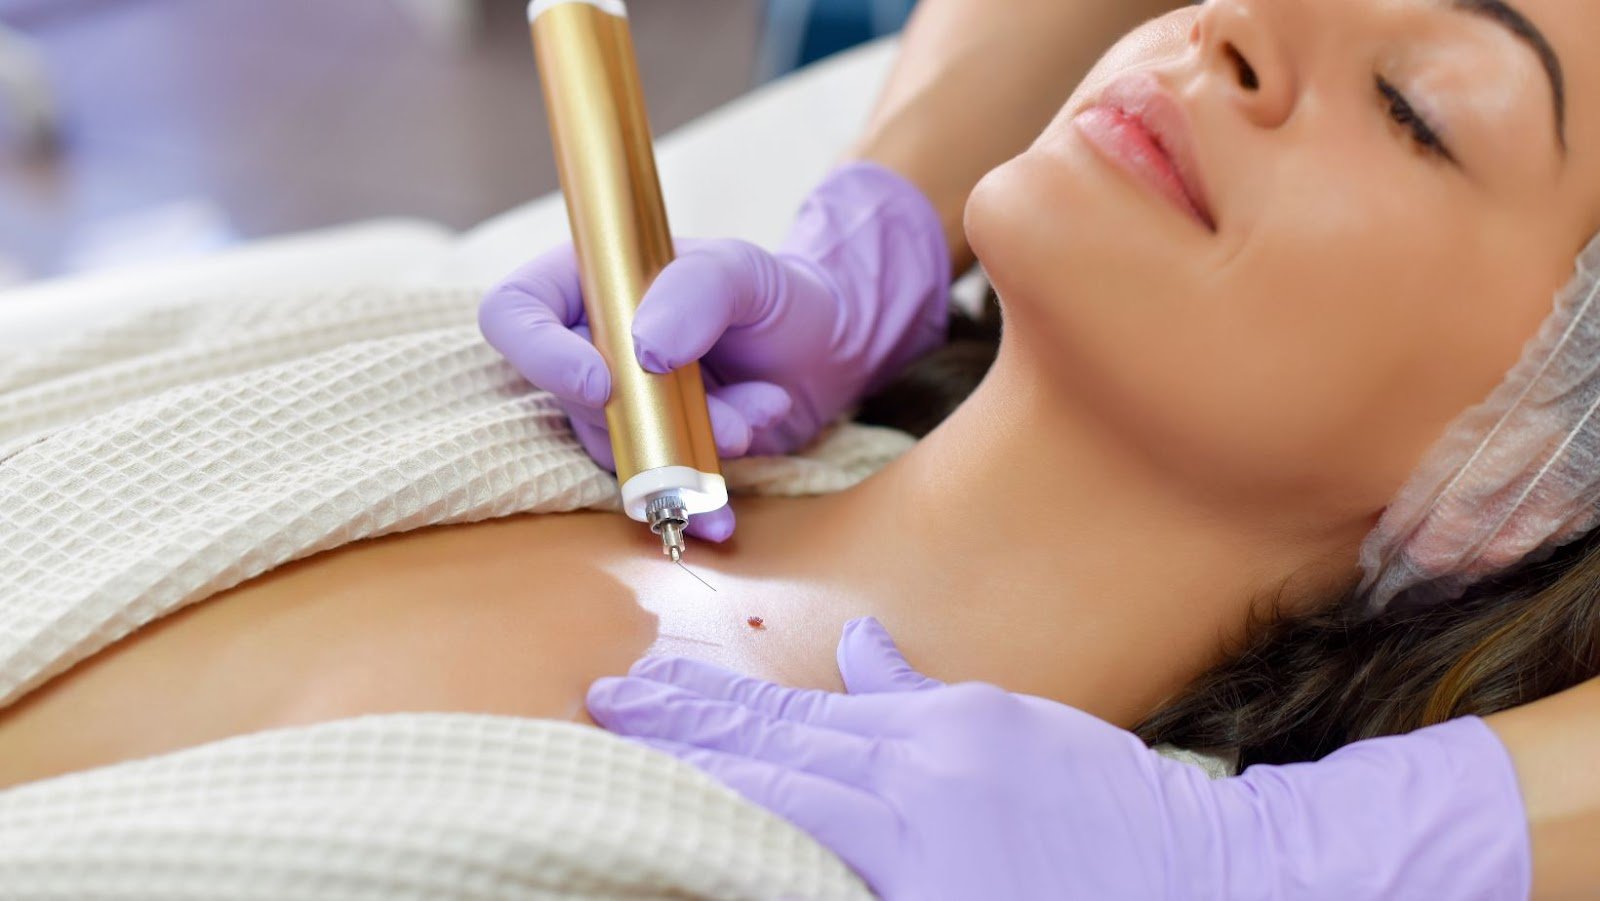 All About Aesthetic Removal of Skin Tags